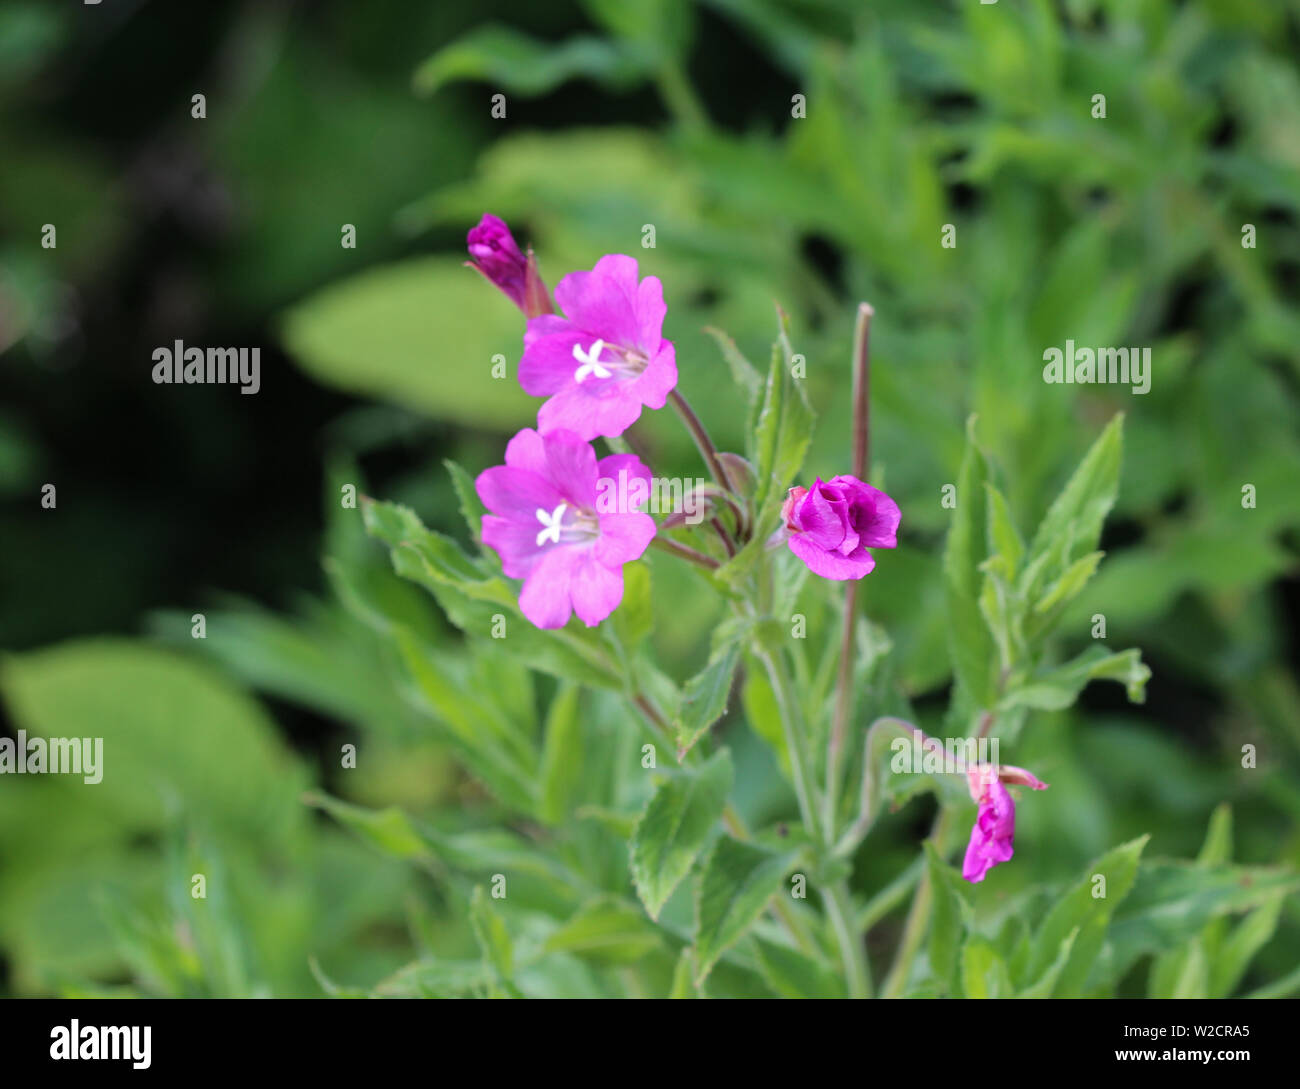 close up of Epilobium hirsutum, commonly known as the great willowherb, great hairy willowherb or hairy willowherb, blooming in forest Stock Photo